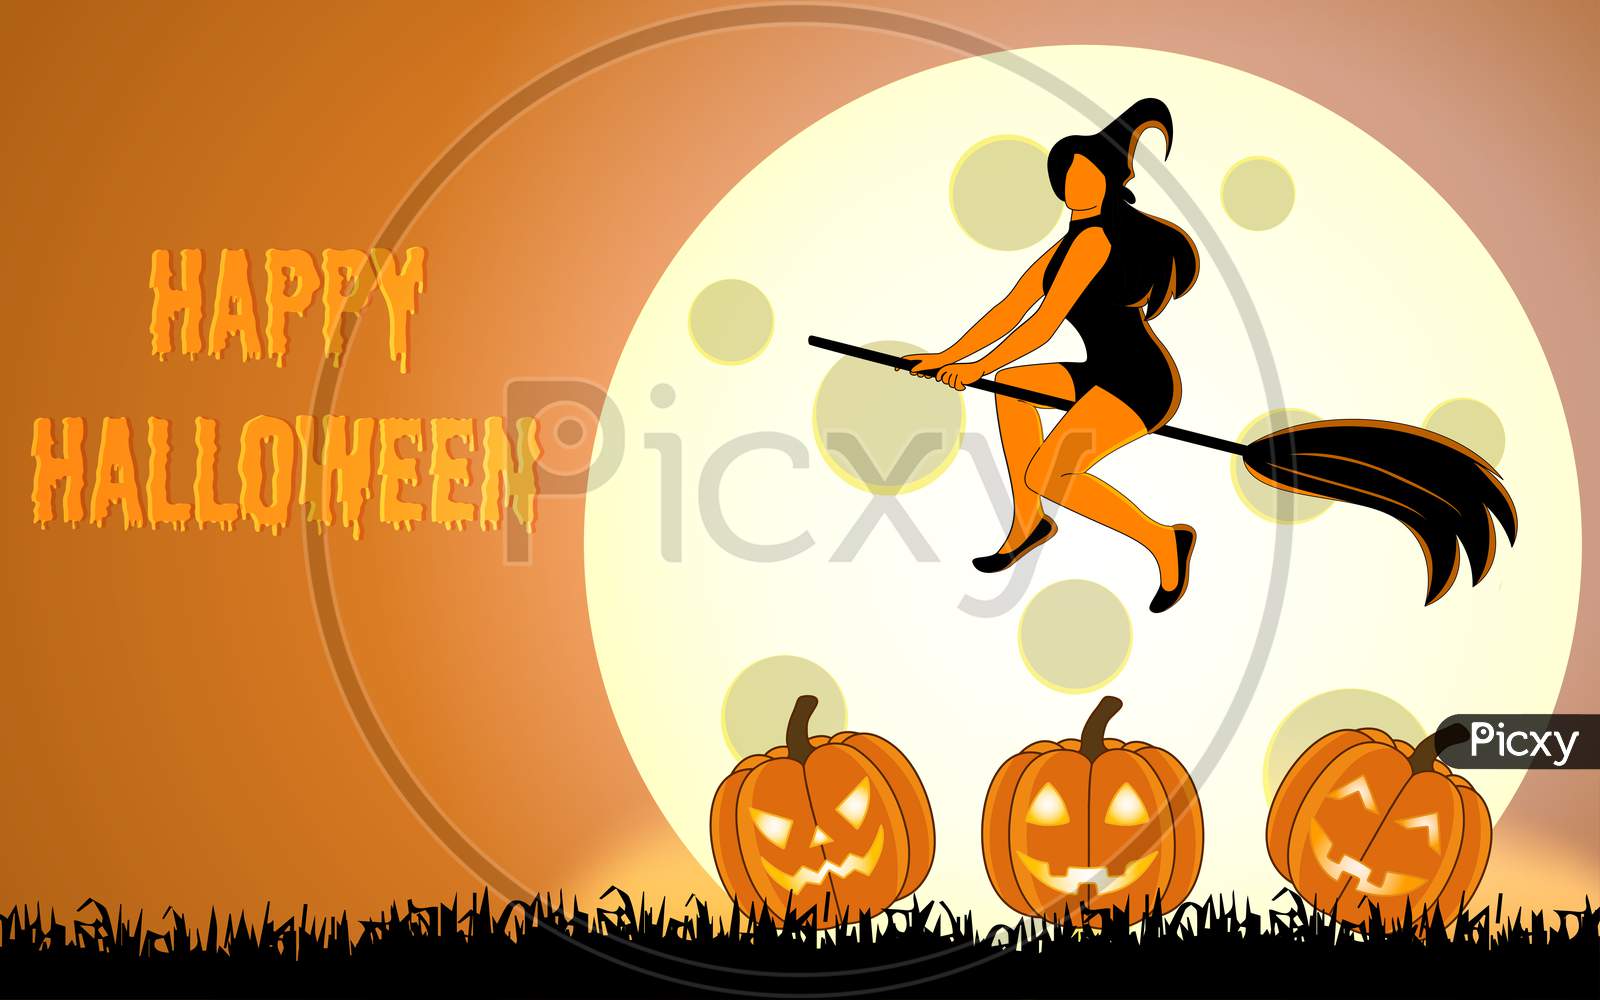 Halloween Illustration For Halloween Party Background And Invitation, Hand Drawn Vector Halloween Illustration With Witch And Cute Scary Pumpkin, Halloween Illustration With Giont Moon On Background.